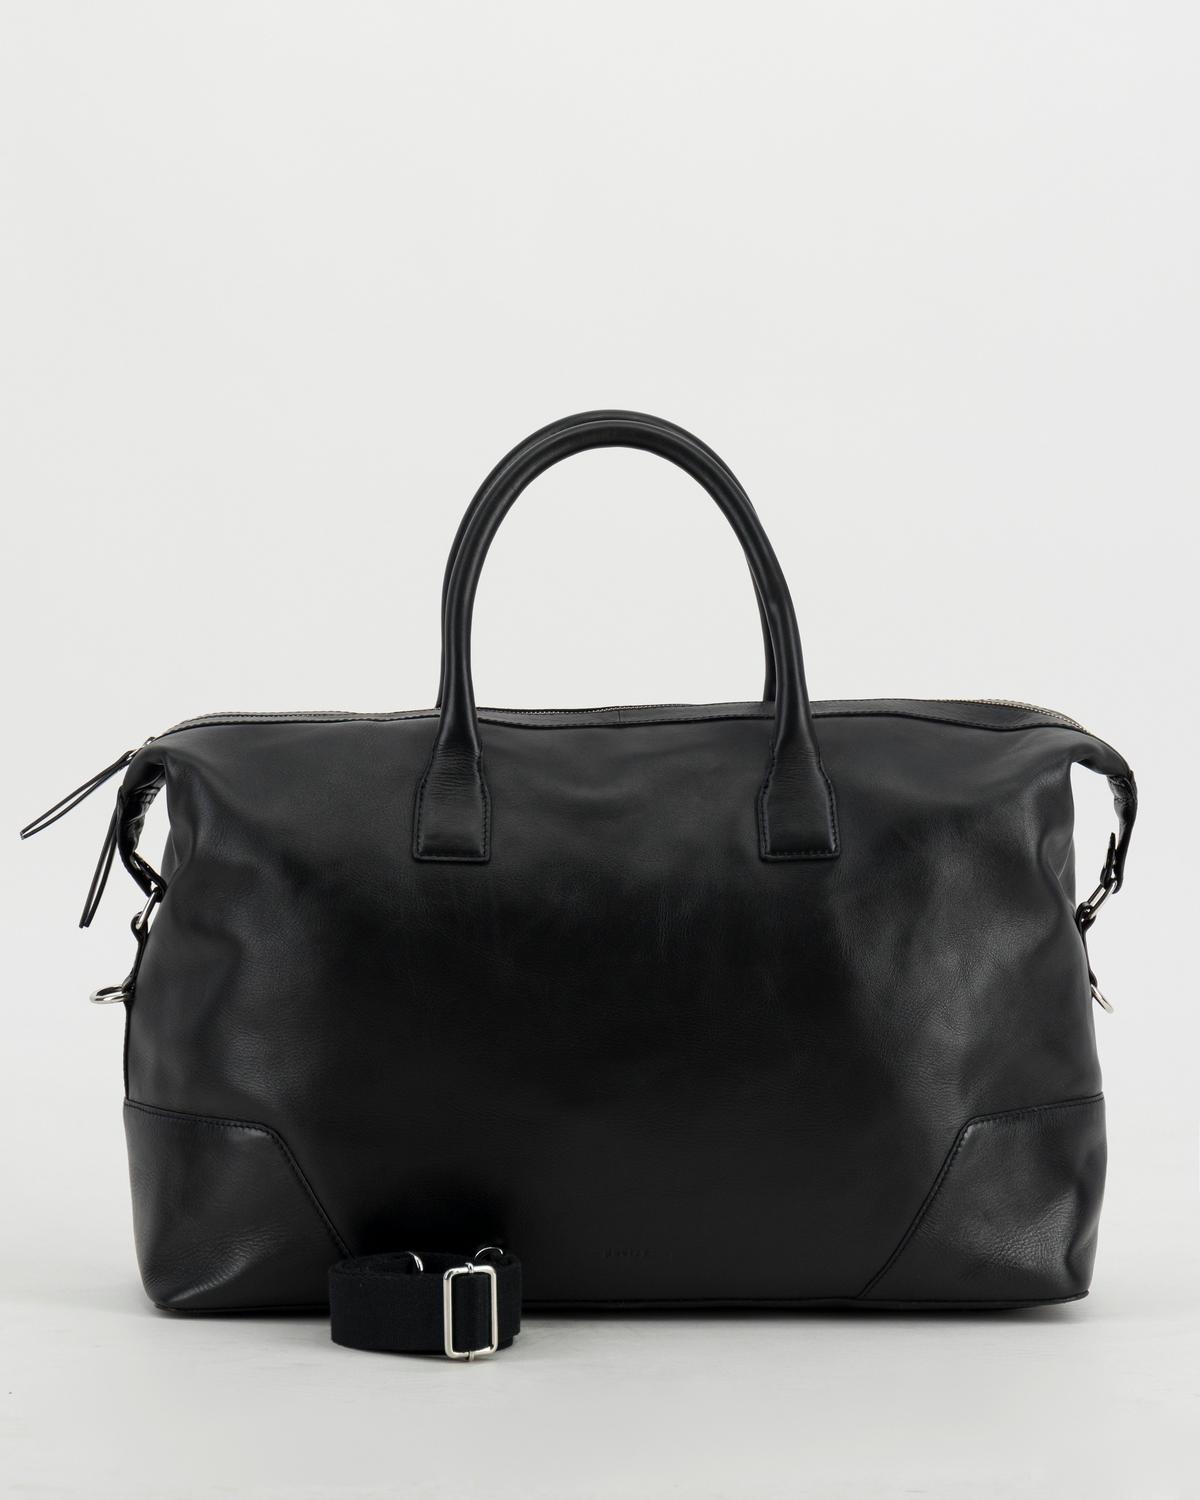 Ches Leather Weekender -  Black